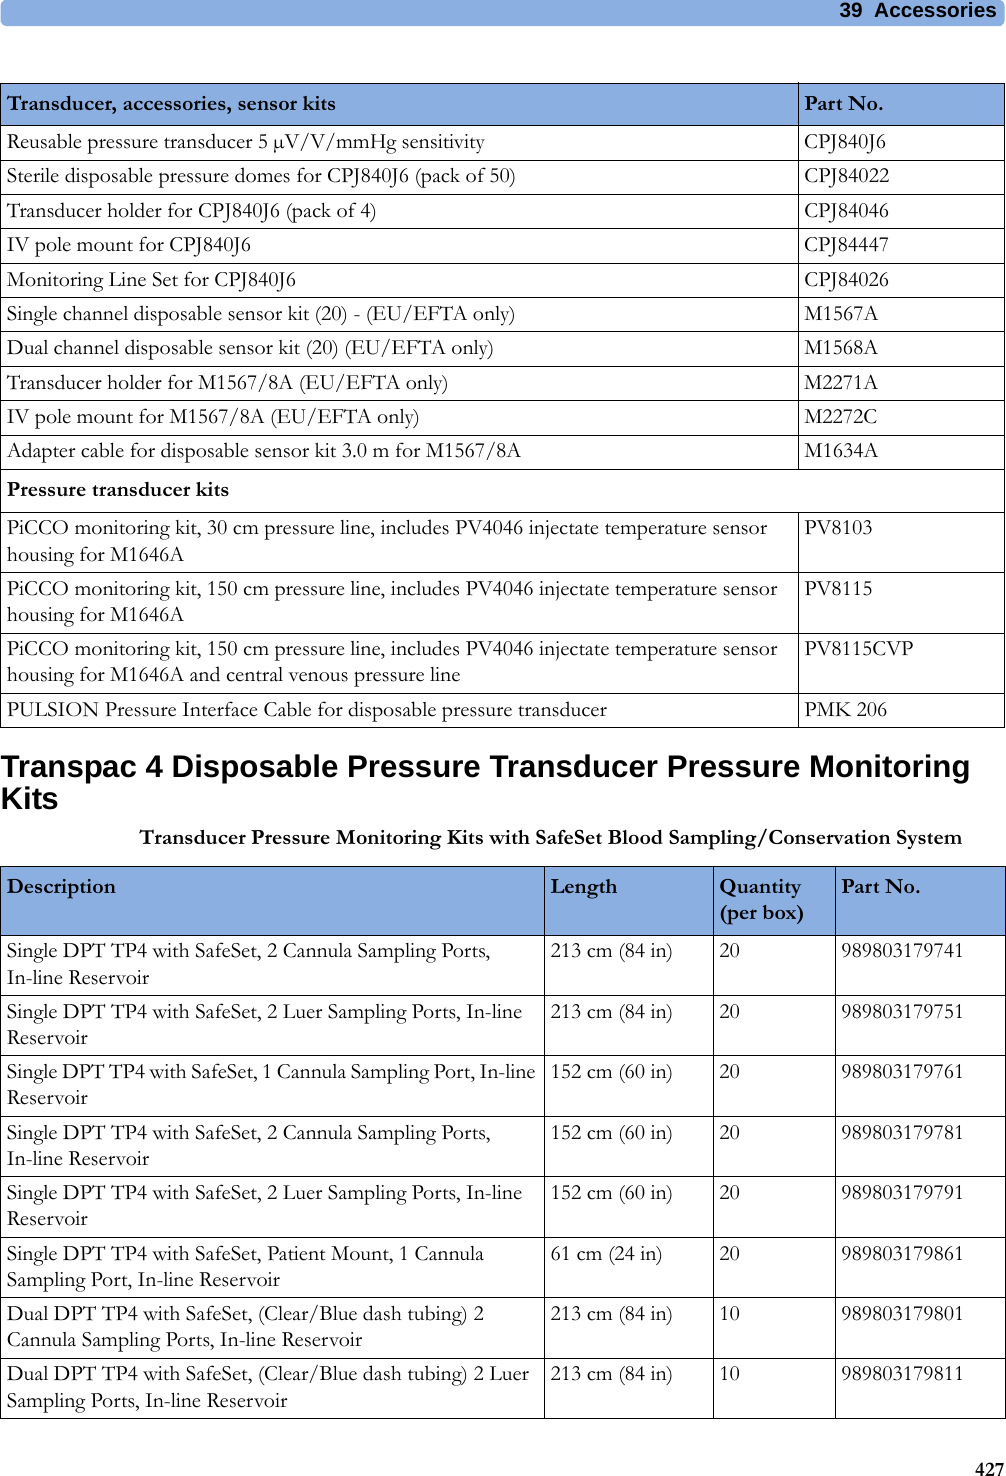 39 Accessories427Transpac 4 Disposable Pressure Transducer Pressure Monitoring KitsTransducer Pressure Monitoring Kits with SafeSet Blood Sampling/Conservation SystemTransducer, accessories, sensor kits Part No.Reusable pressure transducer 5 µV/V/mmHg sensitivity CPJ840J6Sterile disposable pressure domes for CPJ840J6 (pack of 50) CPJ84022Transducer holder for CPJ840J6 (pack of 4) CPJ84046IV pole mount for CPJ840J6 CPJ84447Monitoring Line Set for CPJ840J6 CPJ84026Single channel disposable sensor kit (20) - (EU/EFTA only) M1567ADual channel disposable sensor kit (20) (EU/EFTA only) M1568ATransducer holder for M1567/8A (EU/EFTA only) M2271AIV pole mount for M1567/8A (EU/EFTA only) M2272CAdapter cable for disposable sensor kit 3.0 m for M1567/8A M1634APressure transducer kitsPiCCO monitoring kit, 30 cm pressure line, includes PV4046 injectate temperature sensor housing for M1646APV8103PiCCO monitoring kit, 150 cm pressure line, includes PV4046 injectate temperature sensor housing for M1646APV8115PiCCO monitoring kit, 150 cm pressure line, includes PV4046 injectate temperature sensor housing for M1646A and central venous pressure linePV8115CVPPULSION Pressure Interface Cable for disposable pressure transducer PMK 206Description Length Quantity (per box)Part No.Single DPT TP4 with SafeSet, 2 Cannula Sampling Ports, In-line Reservoir213 cm (84 in) 20 989803179741Single DPT TP4 with SafeSet, 2 Luer Sampling Ports, In-line Reservoir213 cm (84 in) 20 989803179751Single DPT TP4 with SafeSet, 1 Cannula Sampling Port, In-line Reservoir152 cm (60 in) 20 989803179761Single DPT TP4 with SafeSet, 2 Cannula Sampling Ports, In-line Reservoir152 cm (60 in) 20 989803179781Single DPT TP4 with SafeSet, 2 Luer Sampling Ports, In-line Reservoir152 cm (60 in) 20 989803179791Single DPT TP4 with SafeSet, Patient Mount, 1 Cannula Sampling Port, In-line Reservoir61 cm (24 in) 20 989803179861Dual DPT TP4 with SafeSet, (Clear/Blue dash tubing) 2 Cannula Sampling Ports, In-line Reservoir213 cm (84 in) 10 989803179801Dual DPT TP4 with SafeSet, (Clear/Blue dash tubing) 2 Luer Sampling Ports, In-line Reservoir213 cm (84 in) 10 989803179811